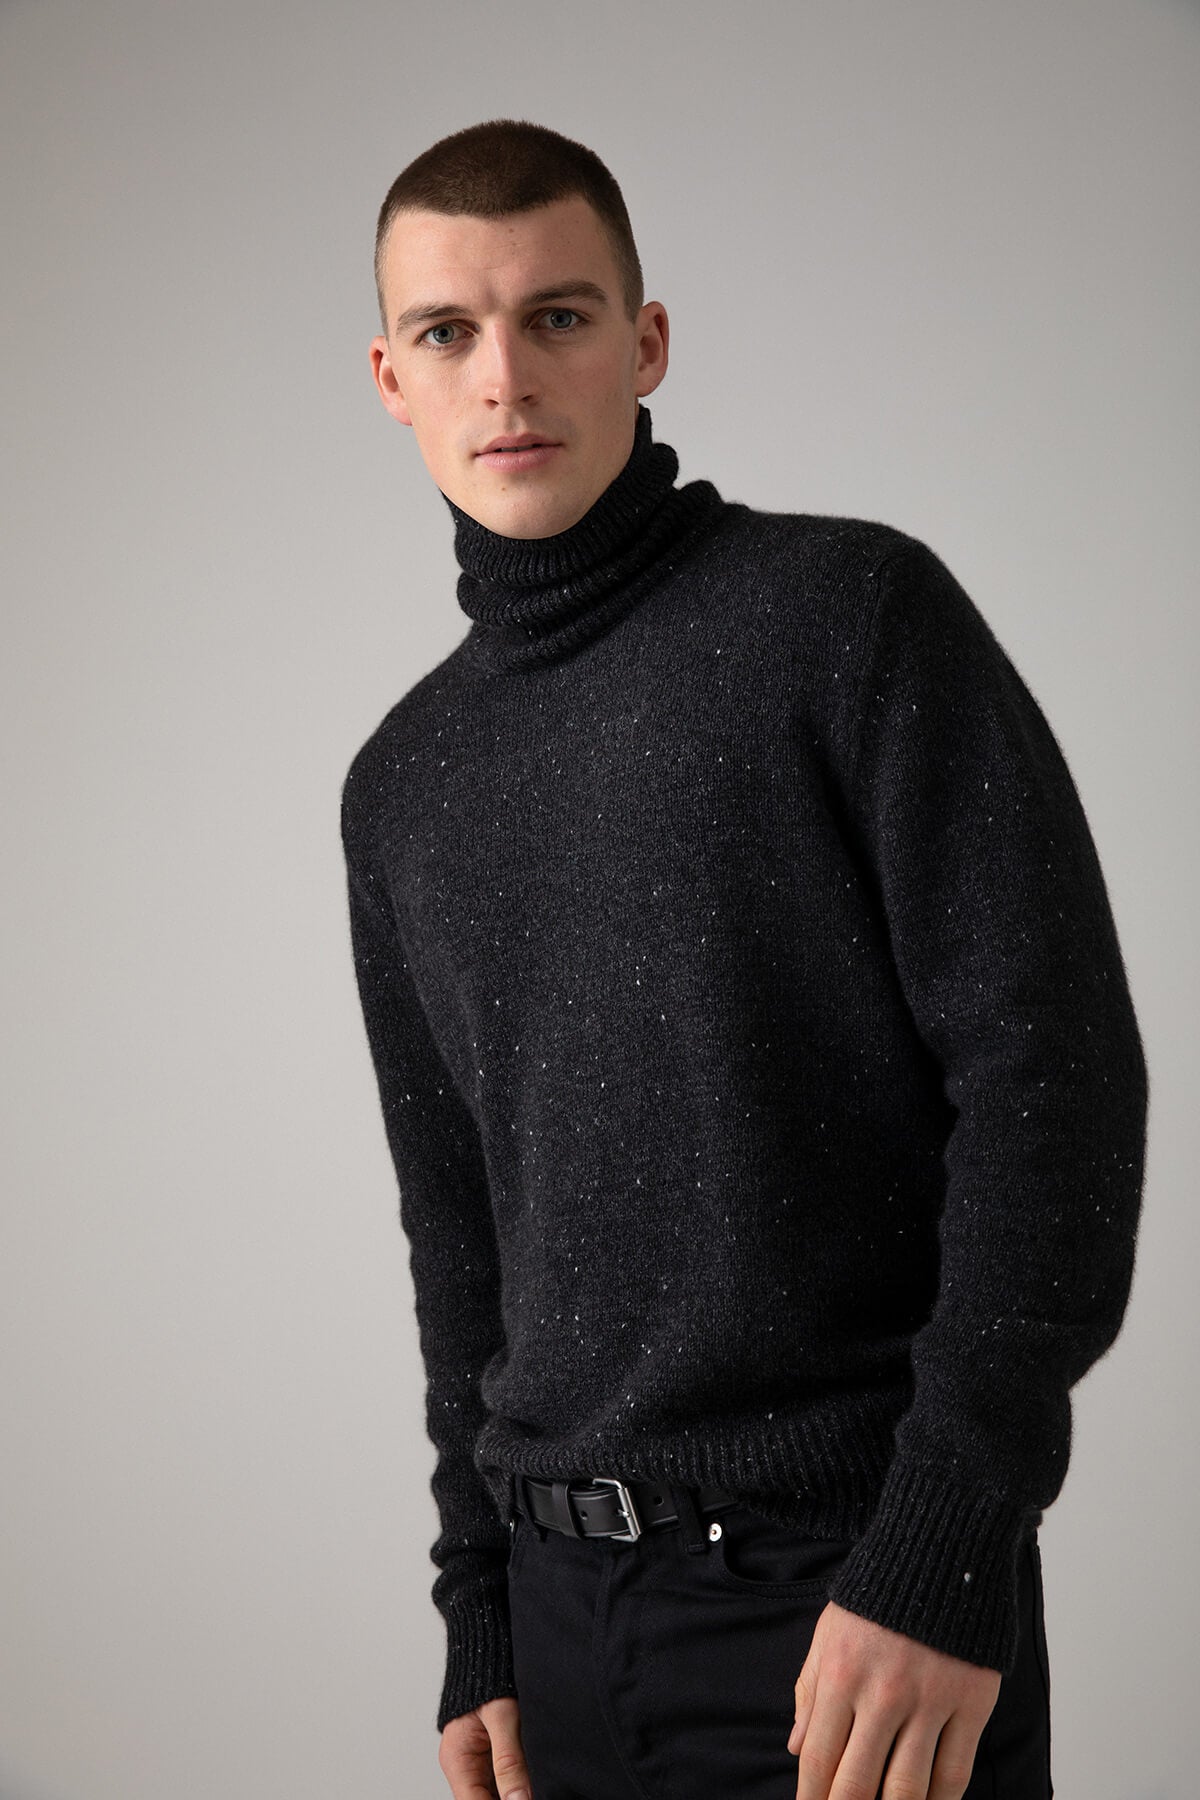 Johnstons of Elgin’s Men's Cashmere Donegal Roll Neck Jumper in Charcoal grey on model wearing black trousers on a grey background KAC05111002675